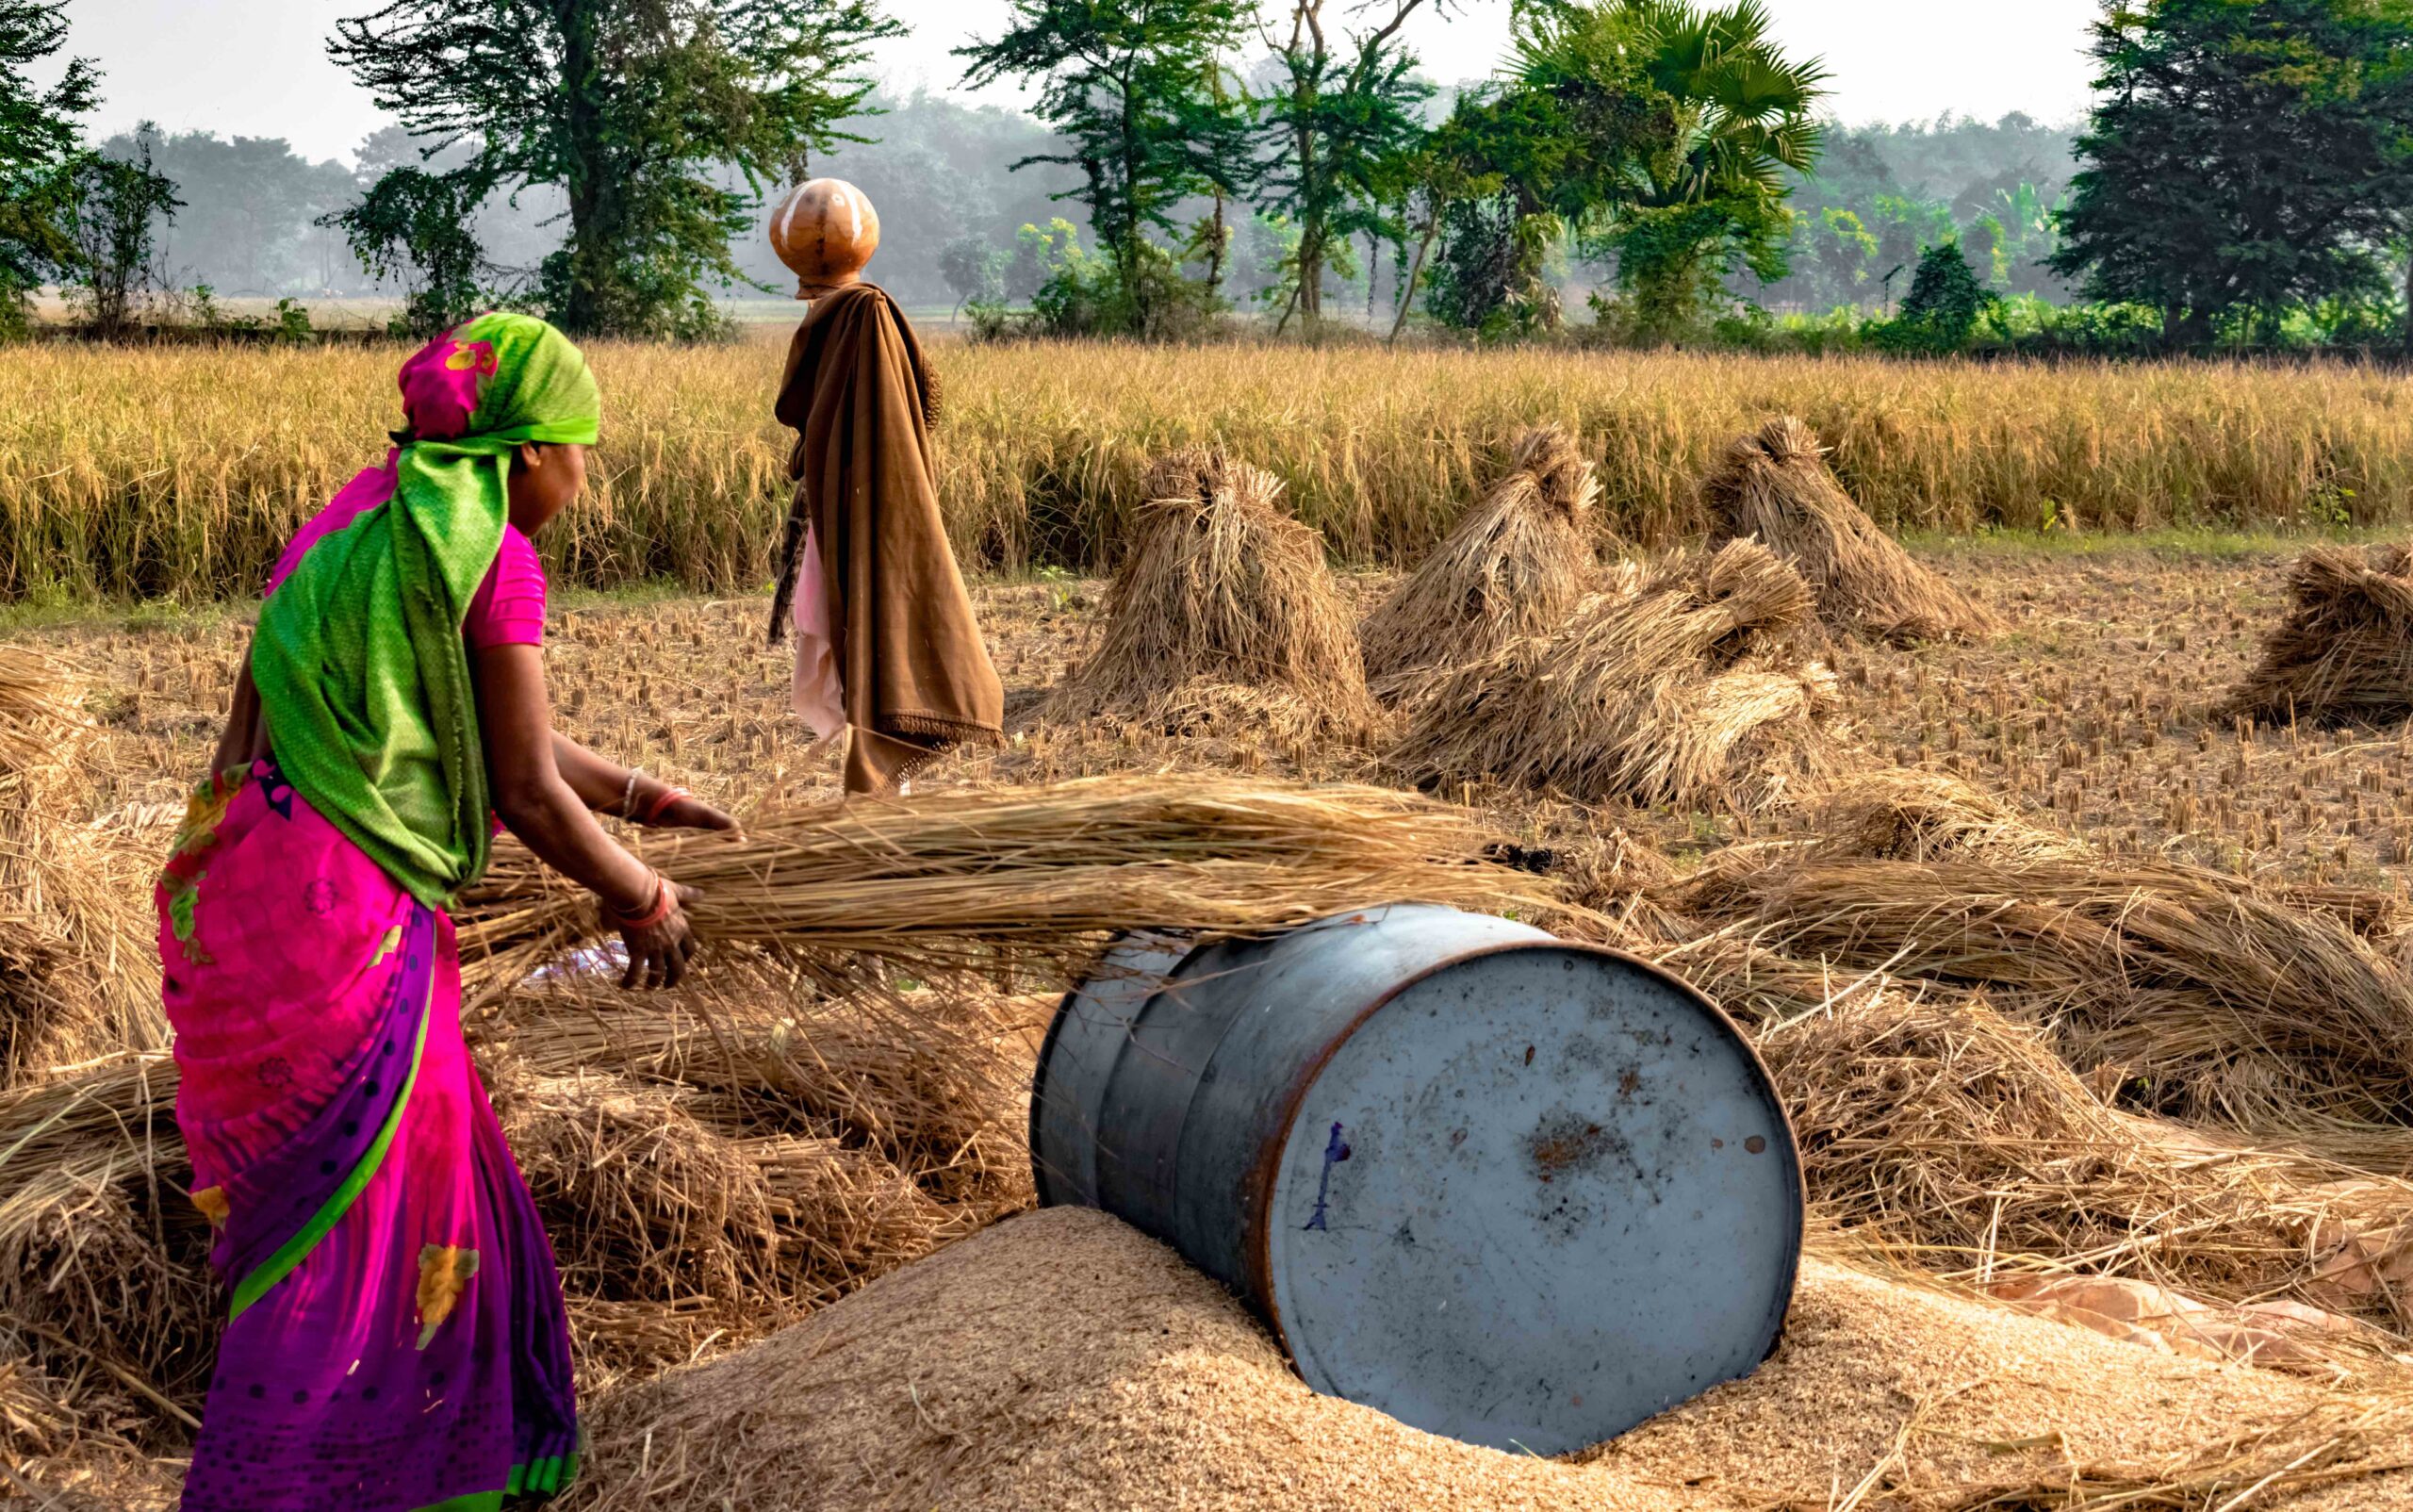 Woman wearing saree threshes stalks of wheat over a barrel in wheat field